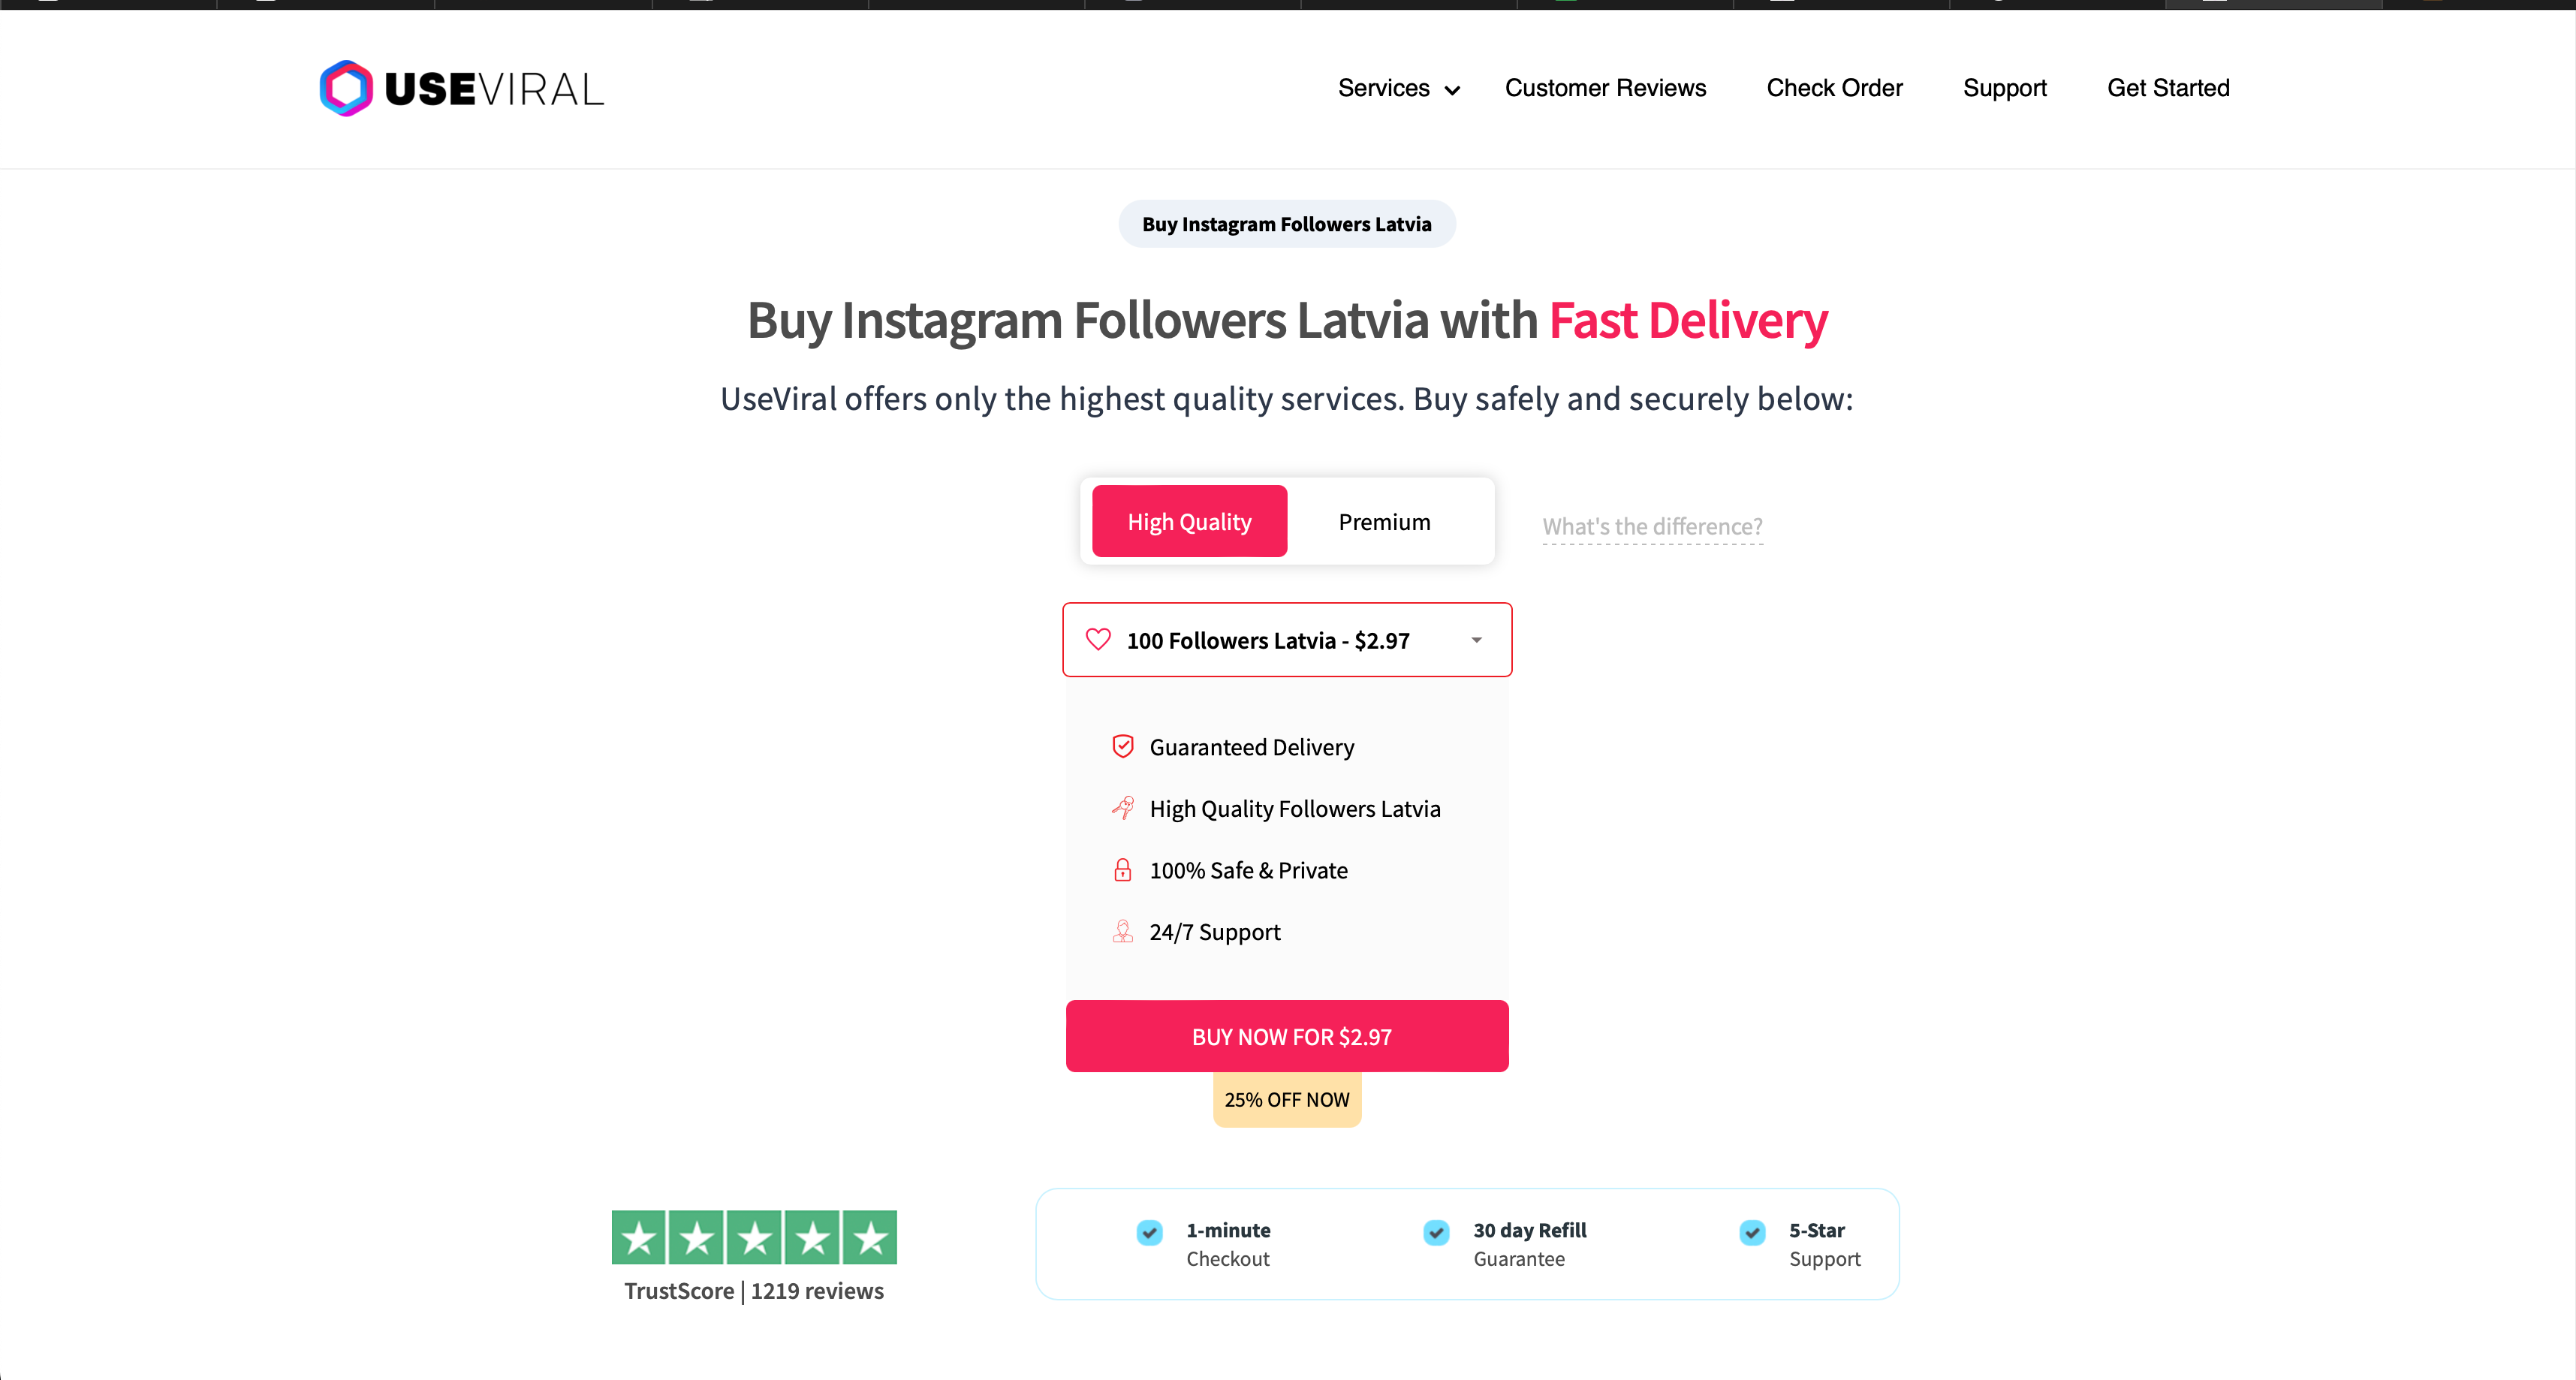 useviral buy instagram followers latvia page